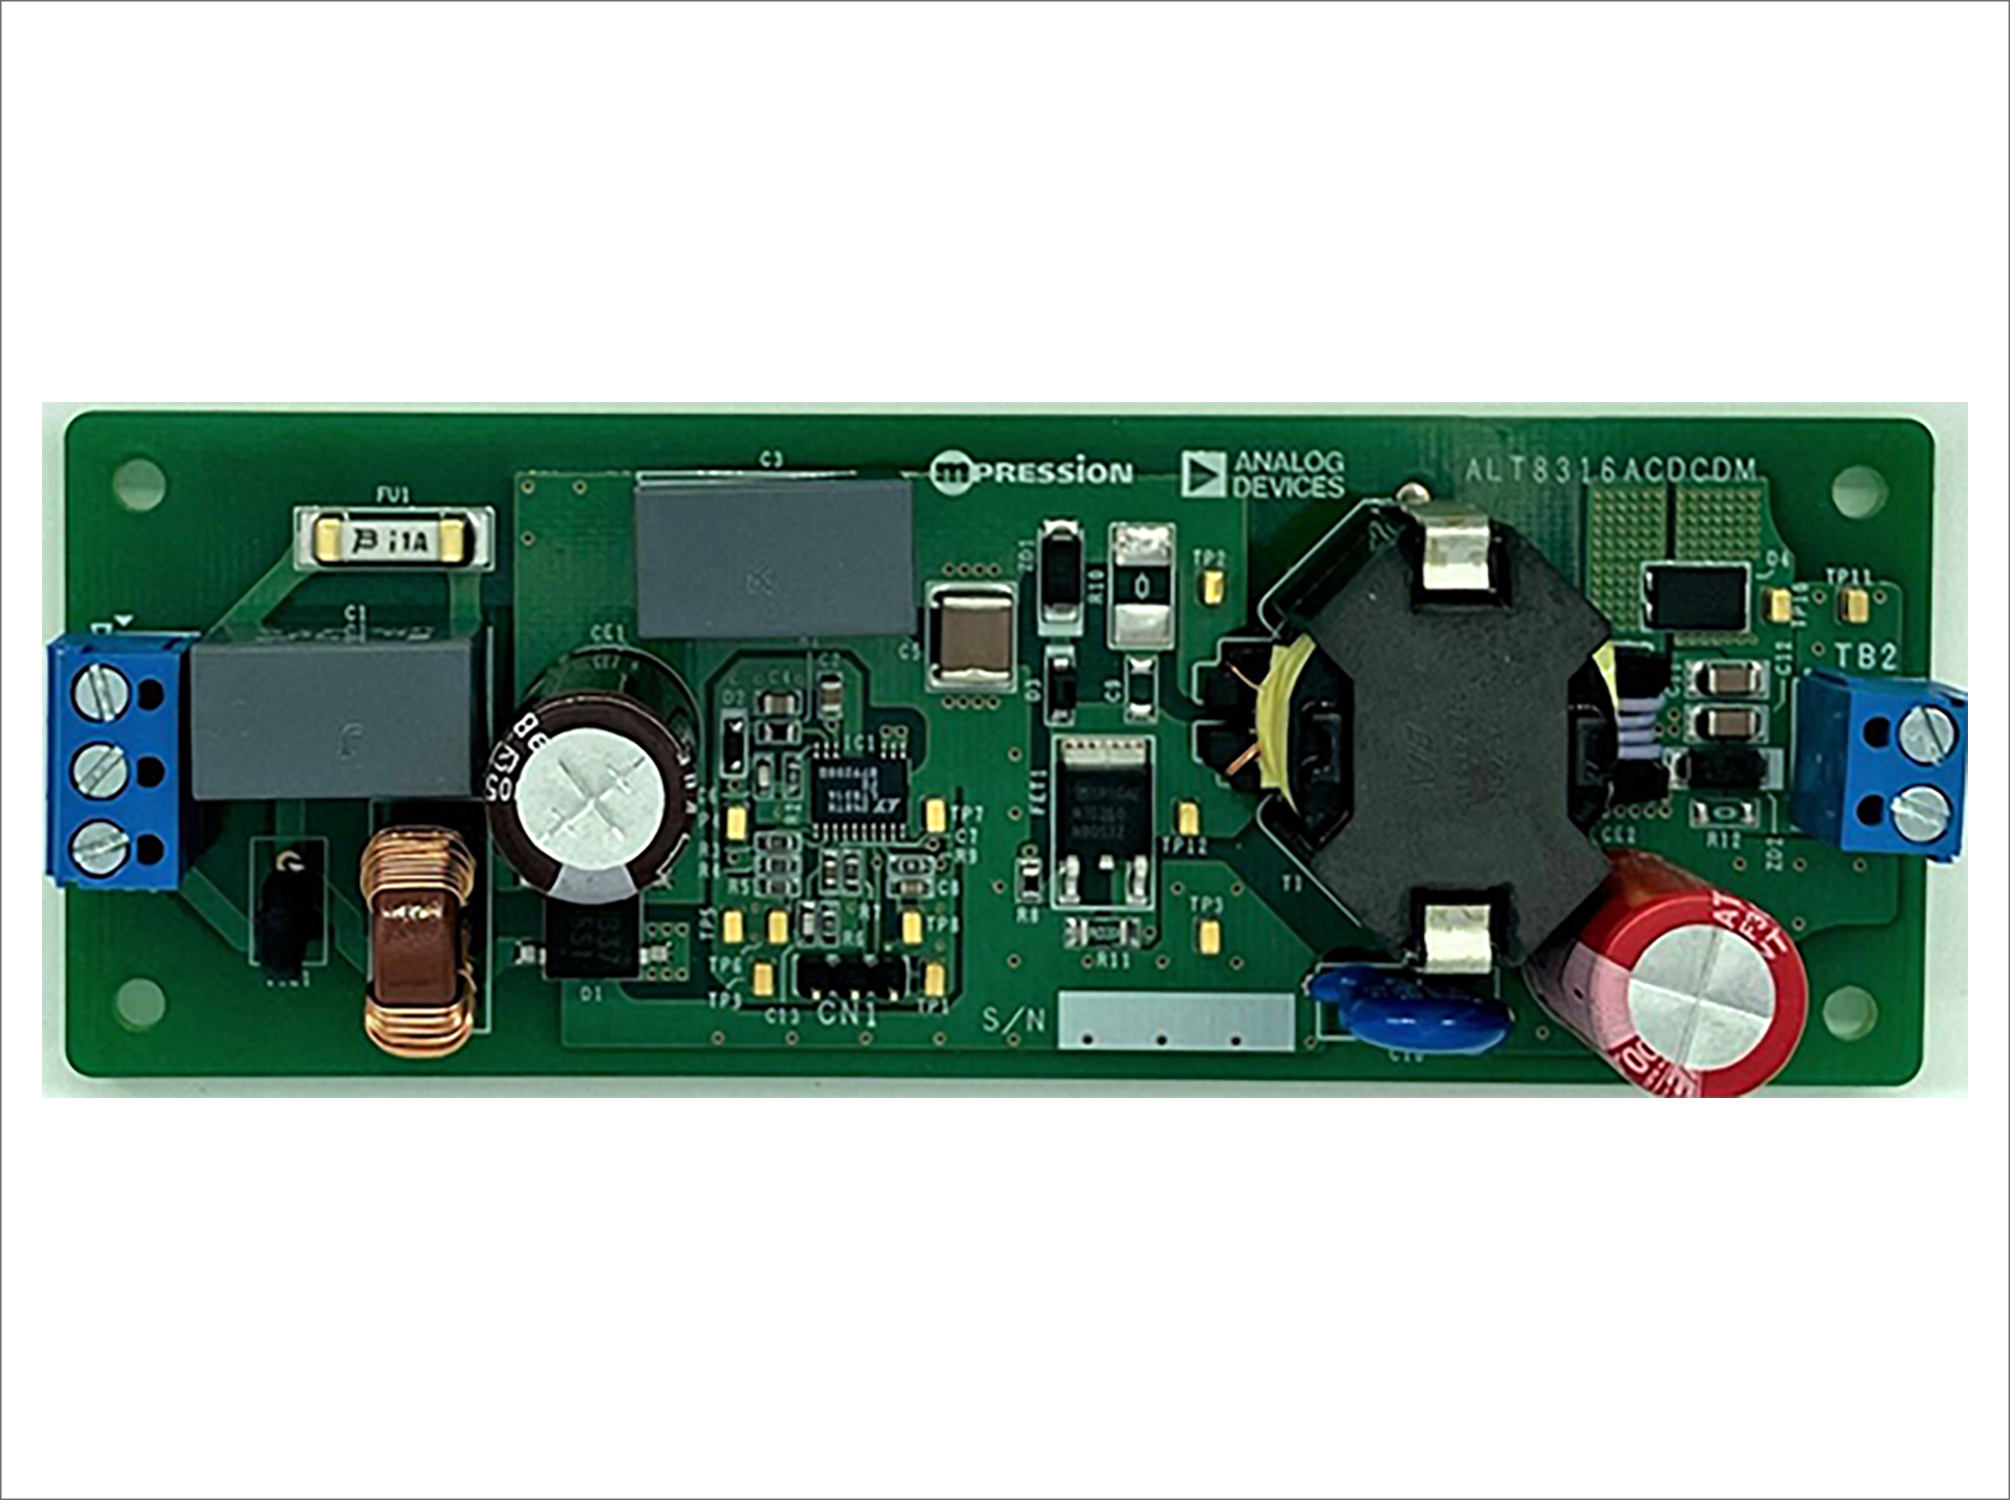 12V Output Isolated AC/DC (JPN) Board with LT8316